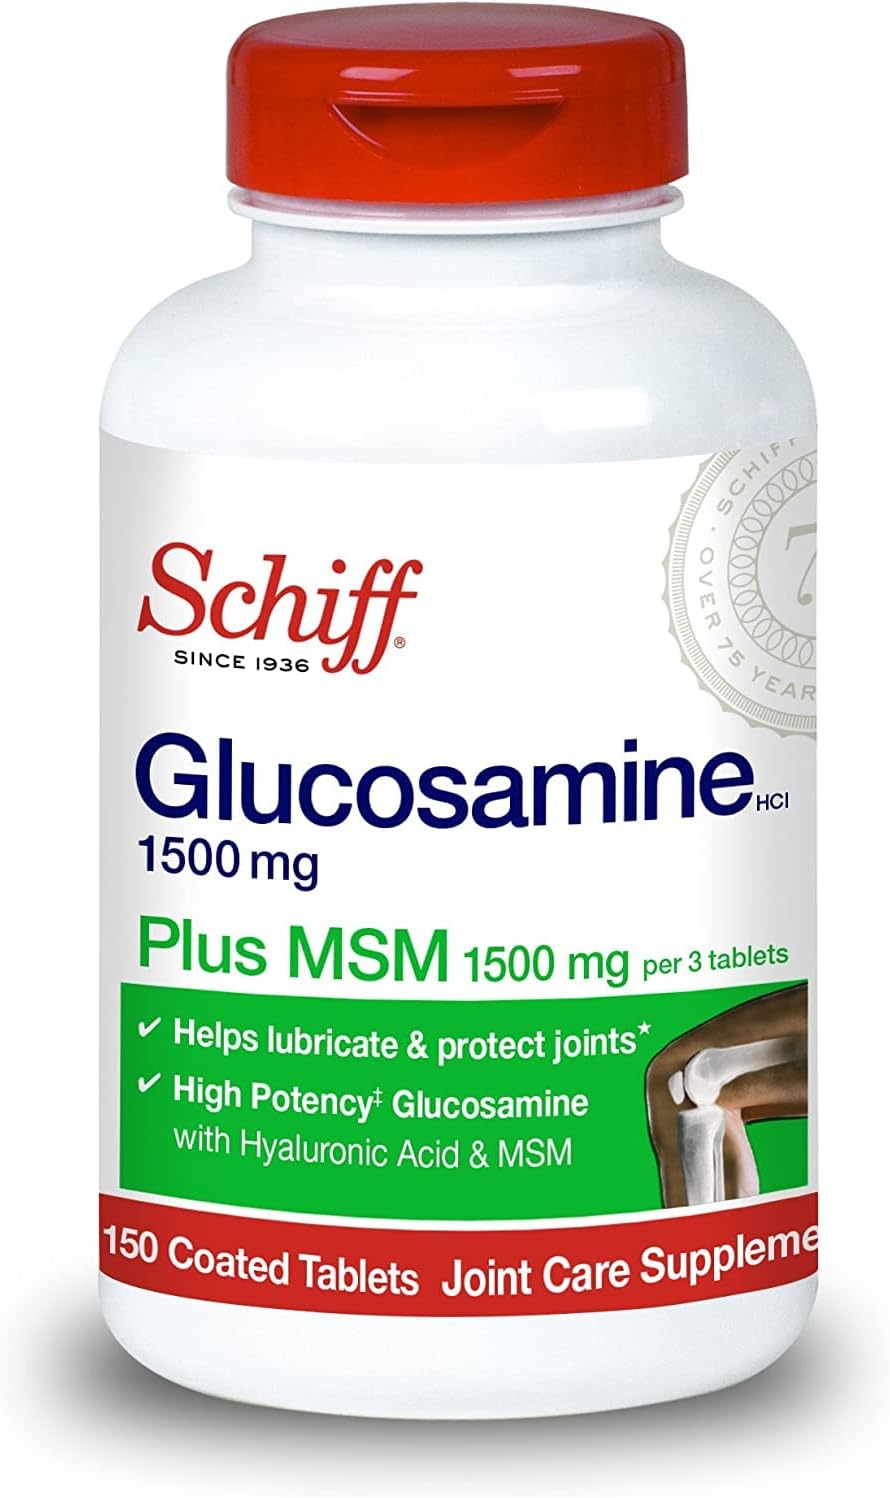 Schiff Glucosamine 1500mg Plus MSM and Hyaluronic Acid, 150 Tablets - Joint Supplement (Pack of 2)